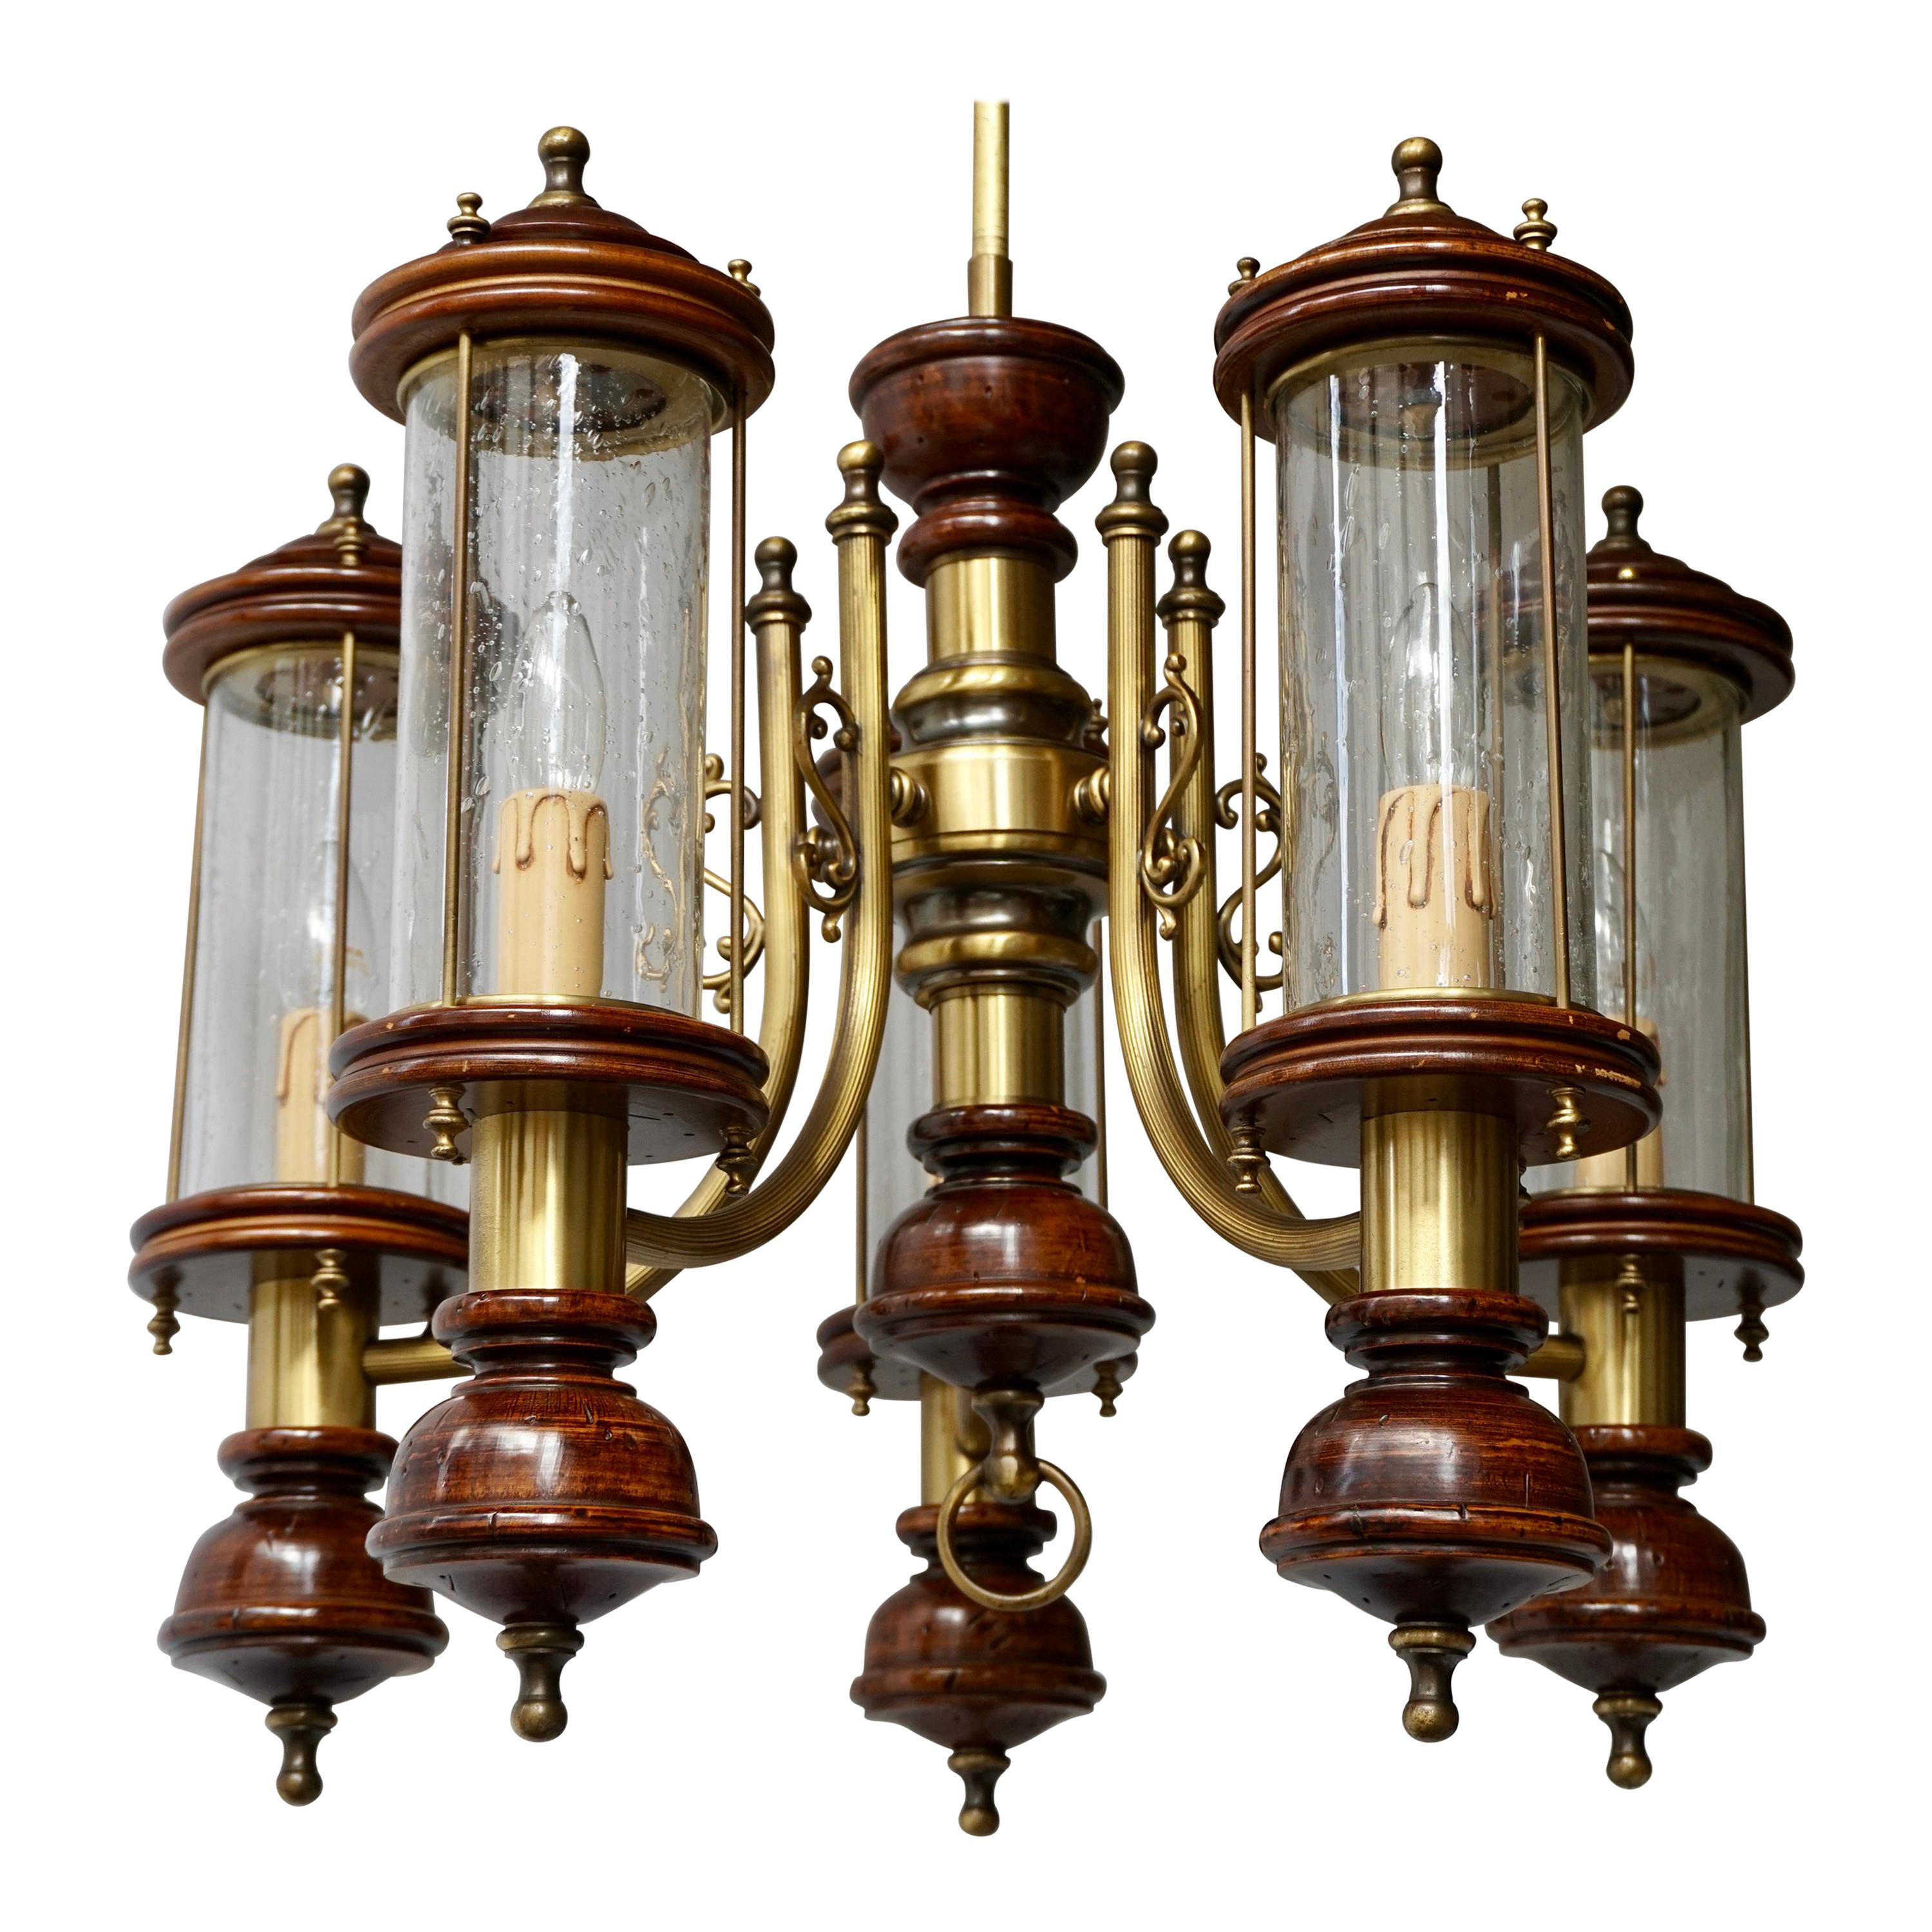 Chandelier is Glass, Brass and Wood